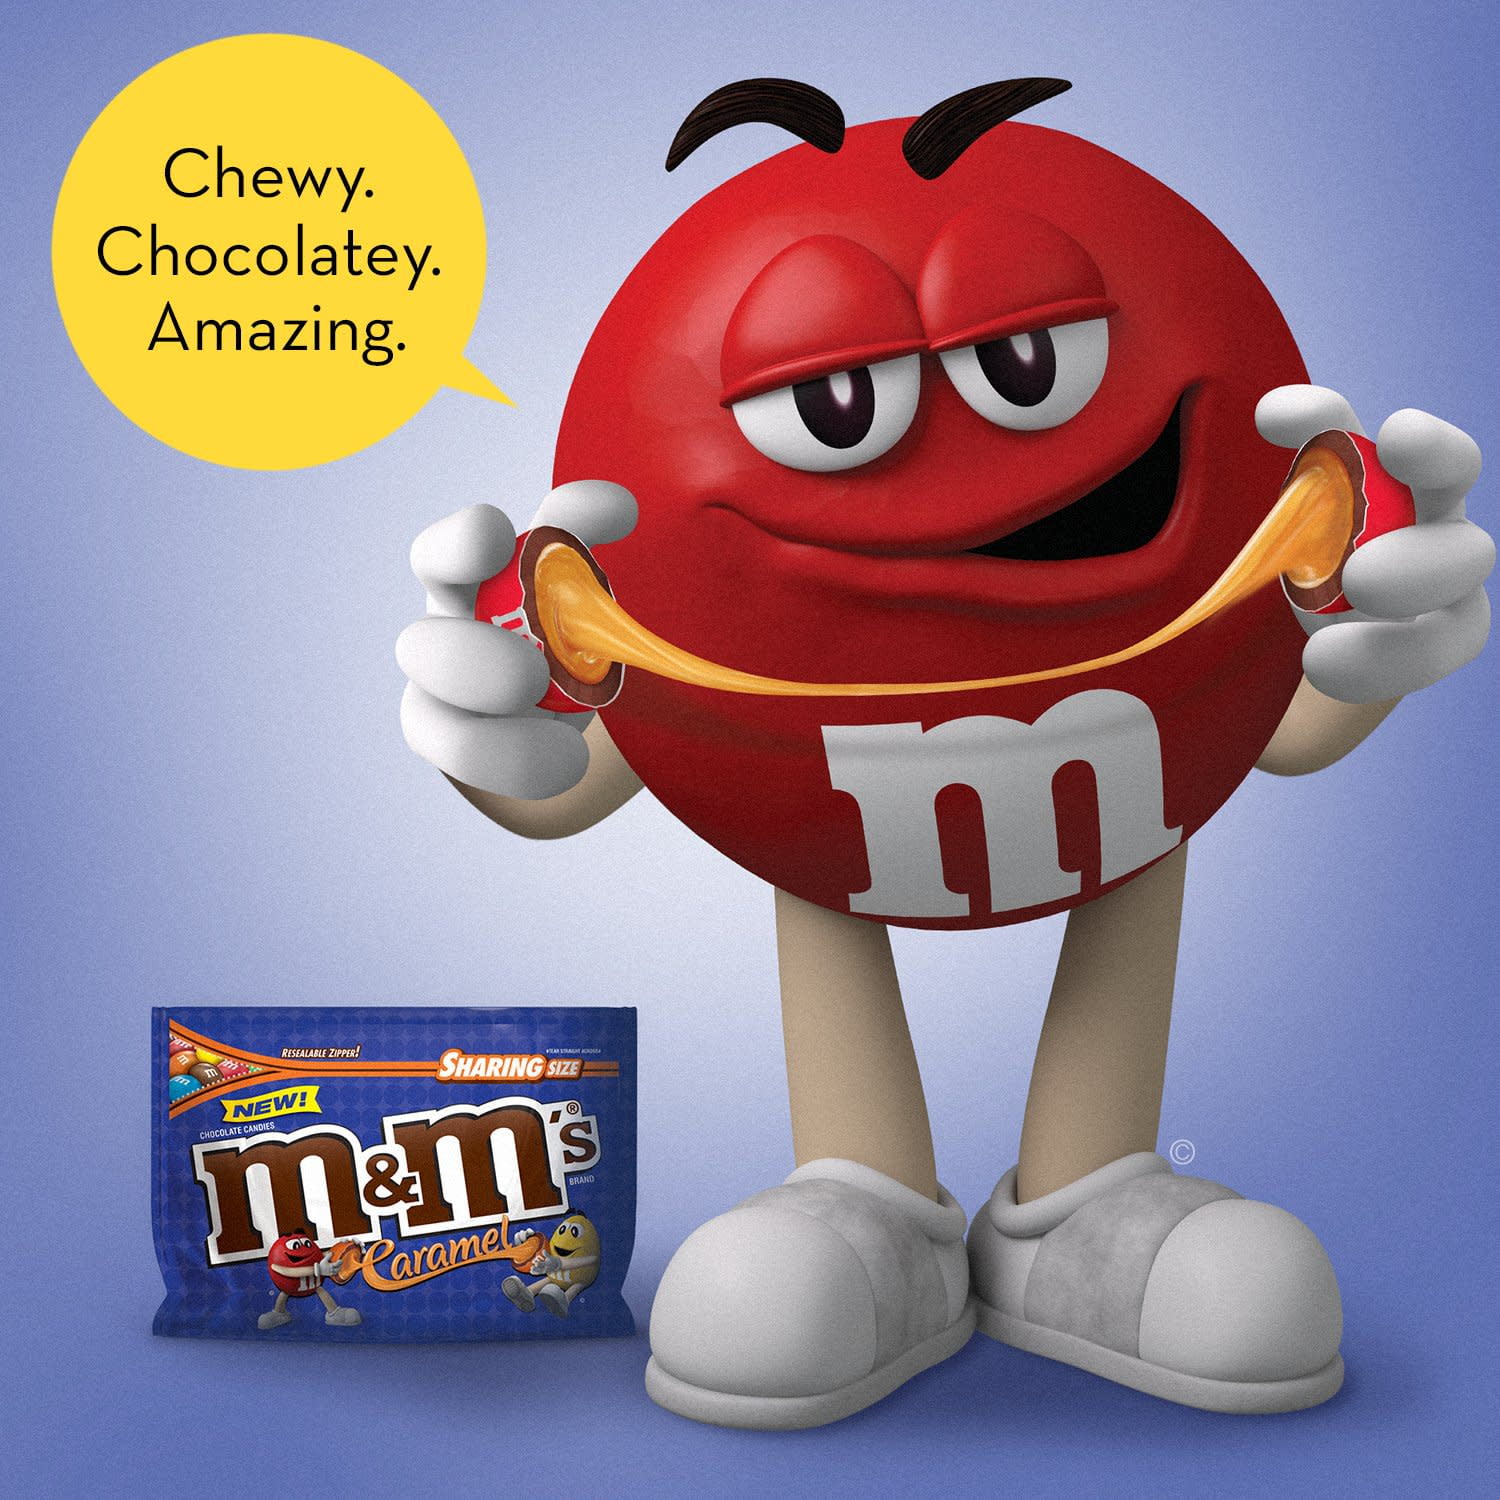 Save on M&M's Chocolate Candies Caramel Sharing Size Order Online